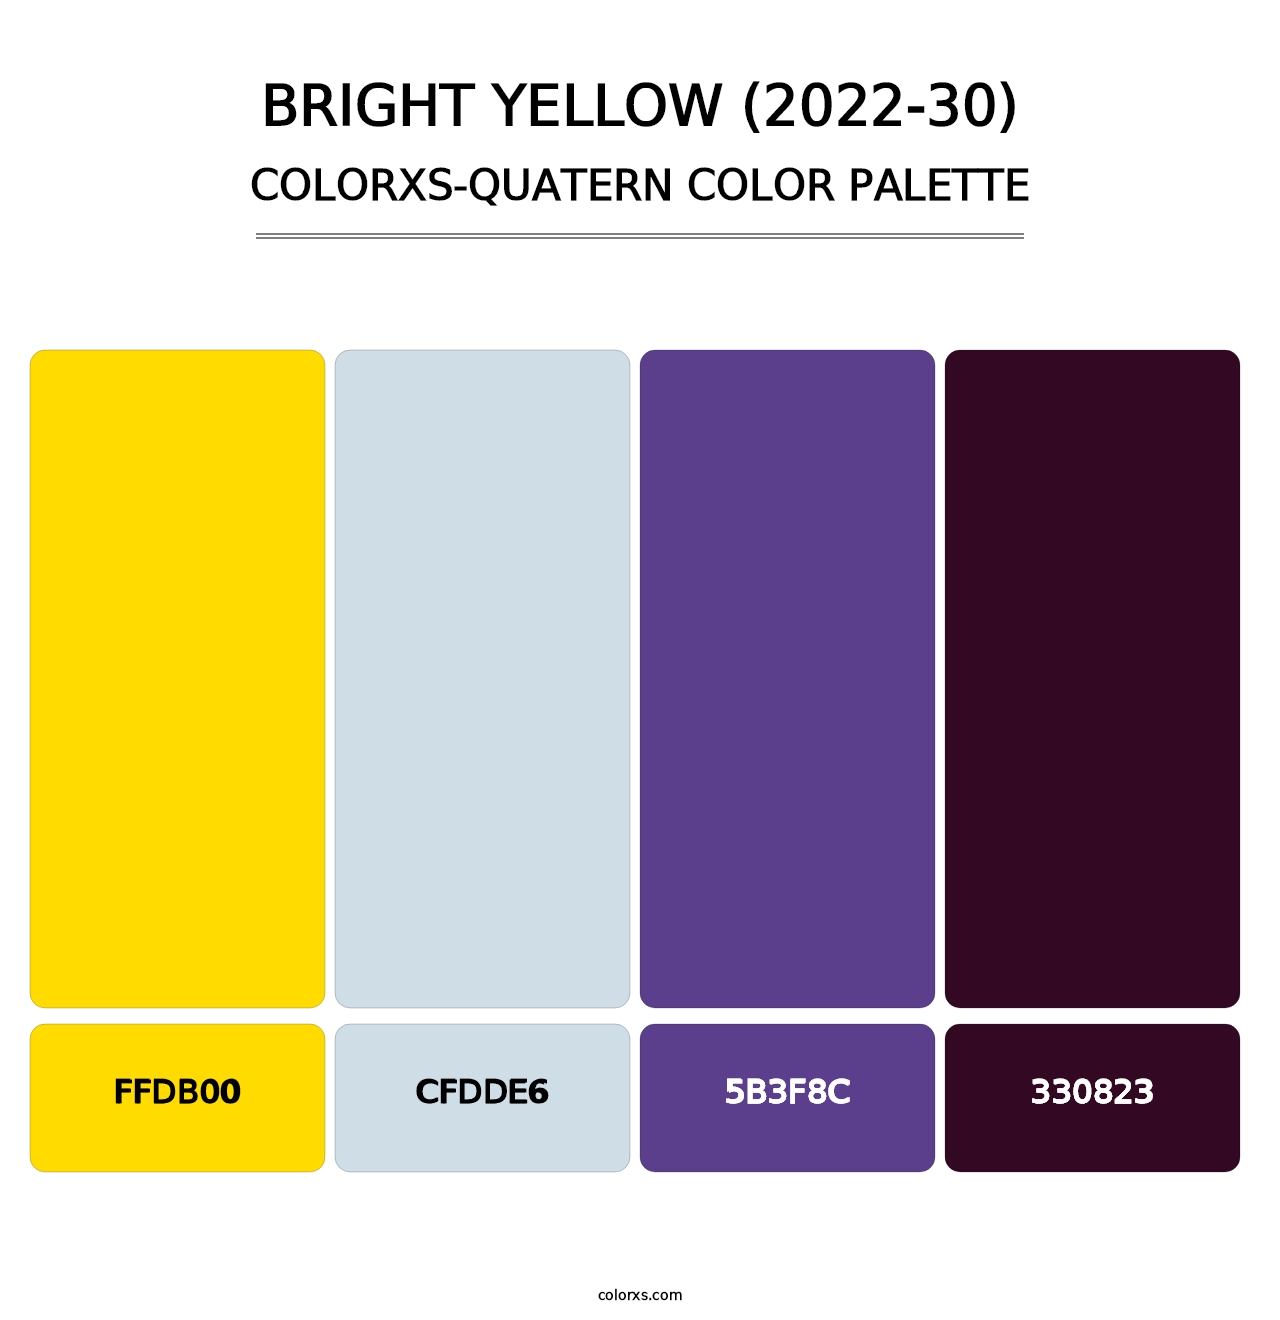 Bright Yellow (2022-30) - Colorxs Quatern Palette